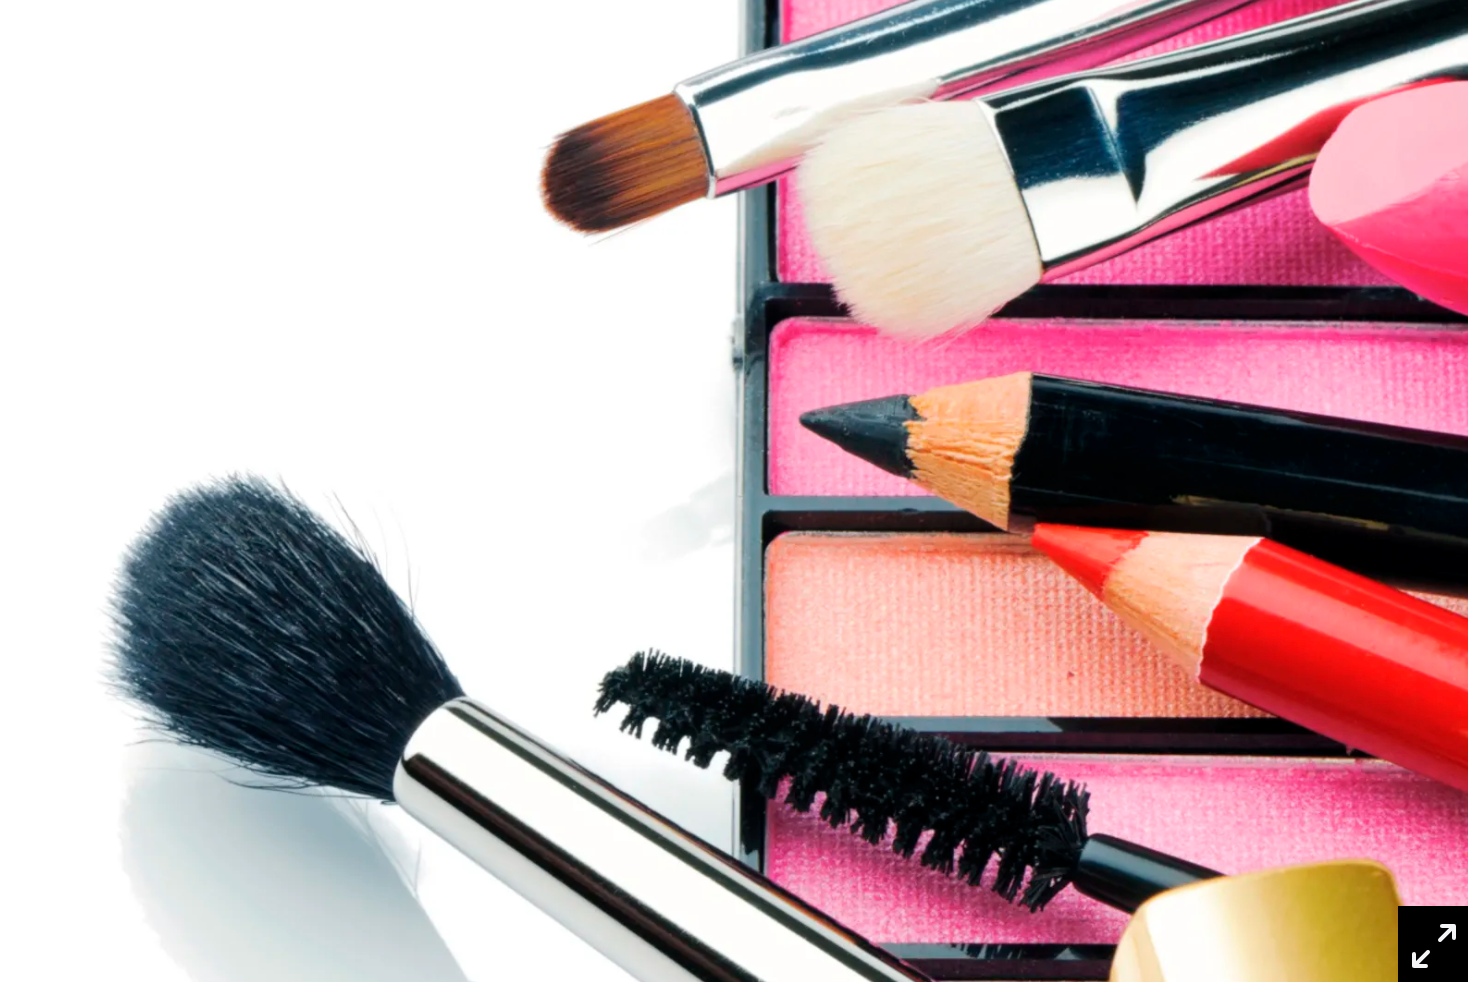 How to Find Makeup That's Free of Cancer-Linked 'Forever Chemicals